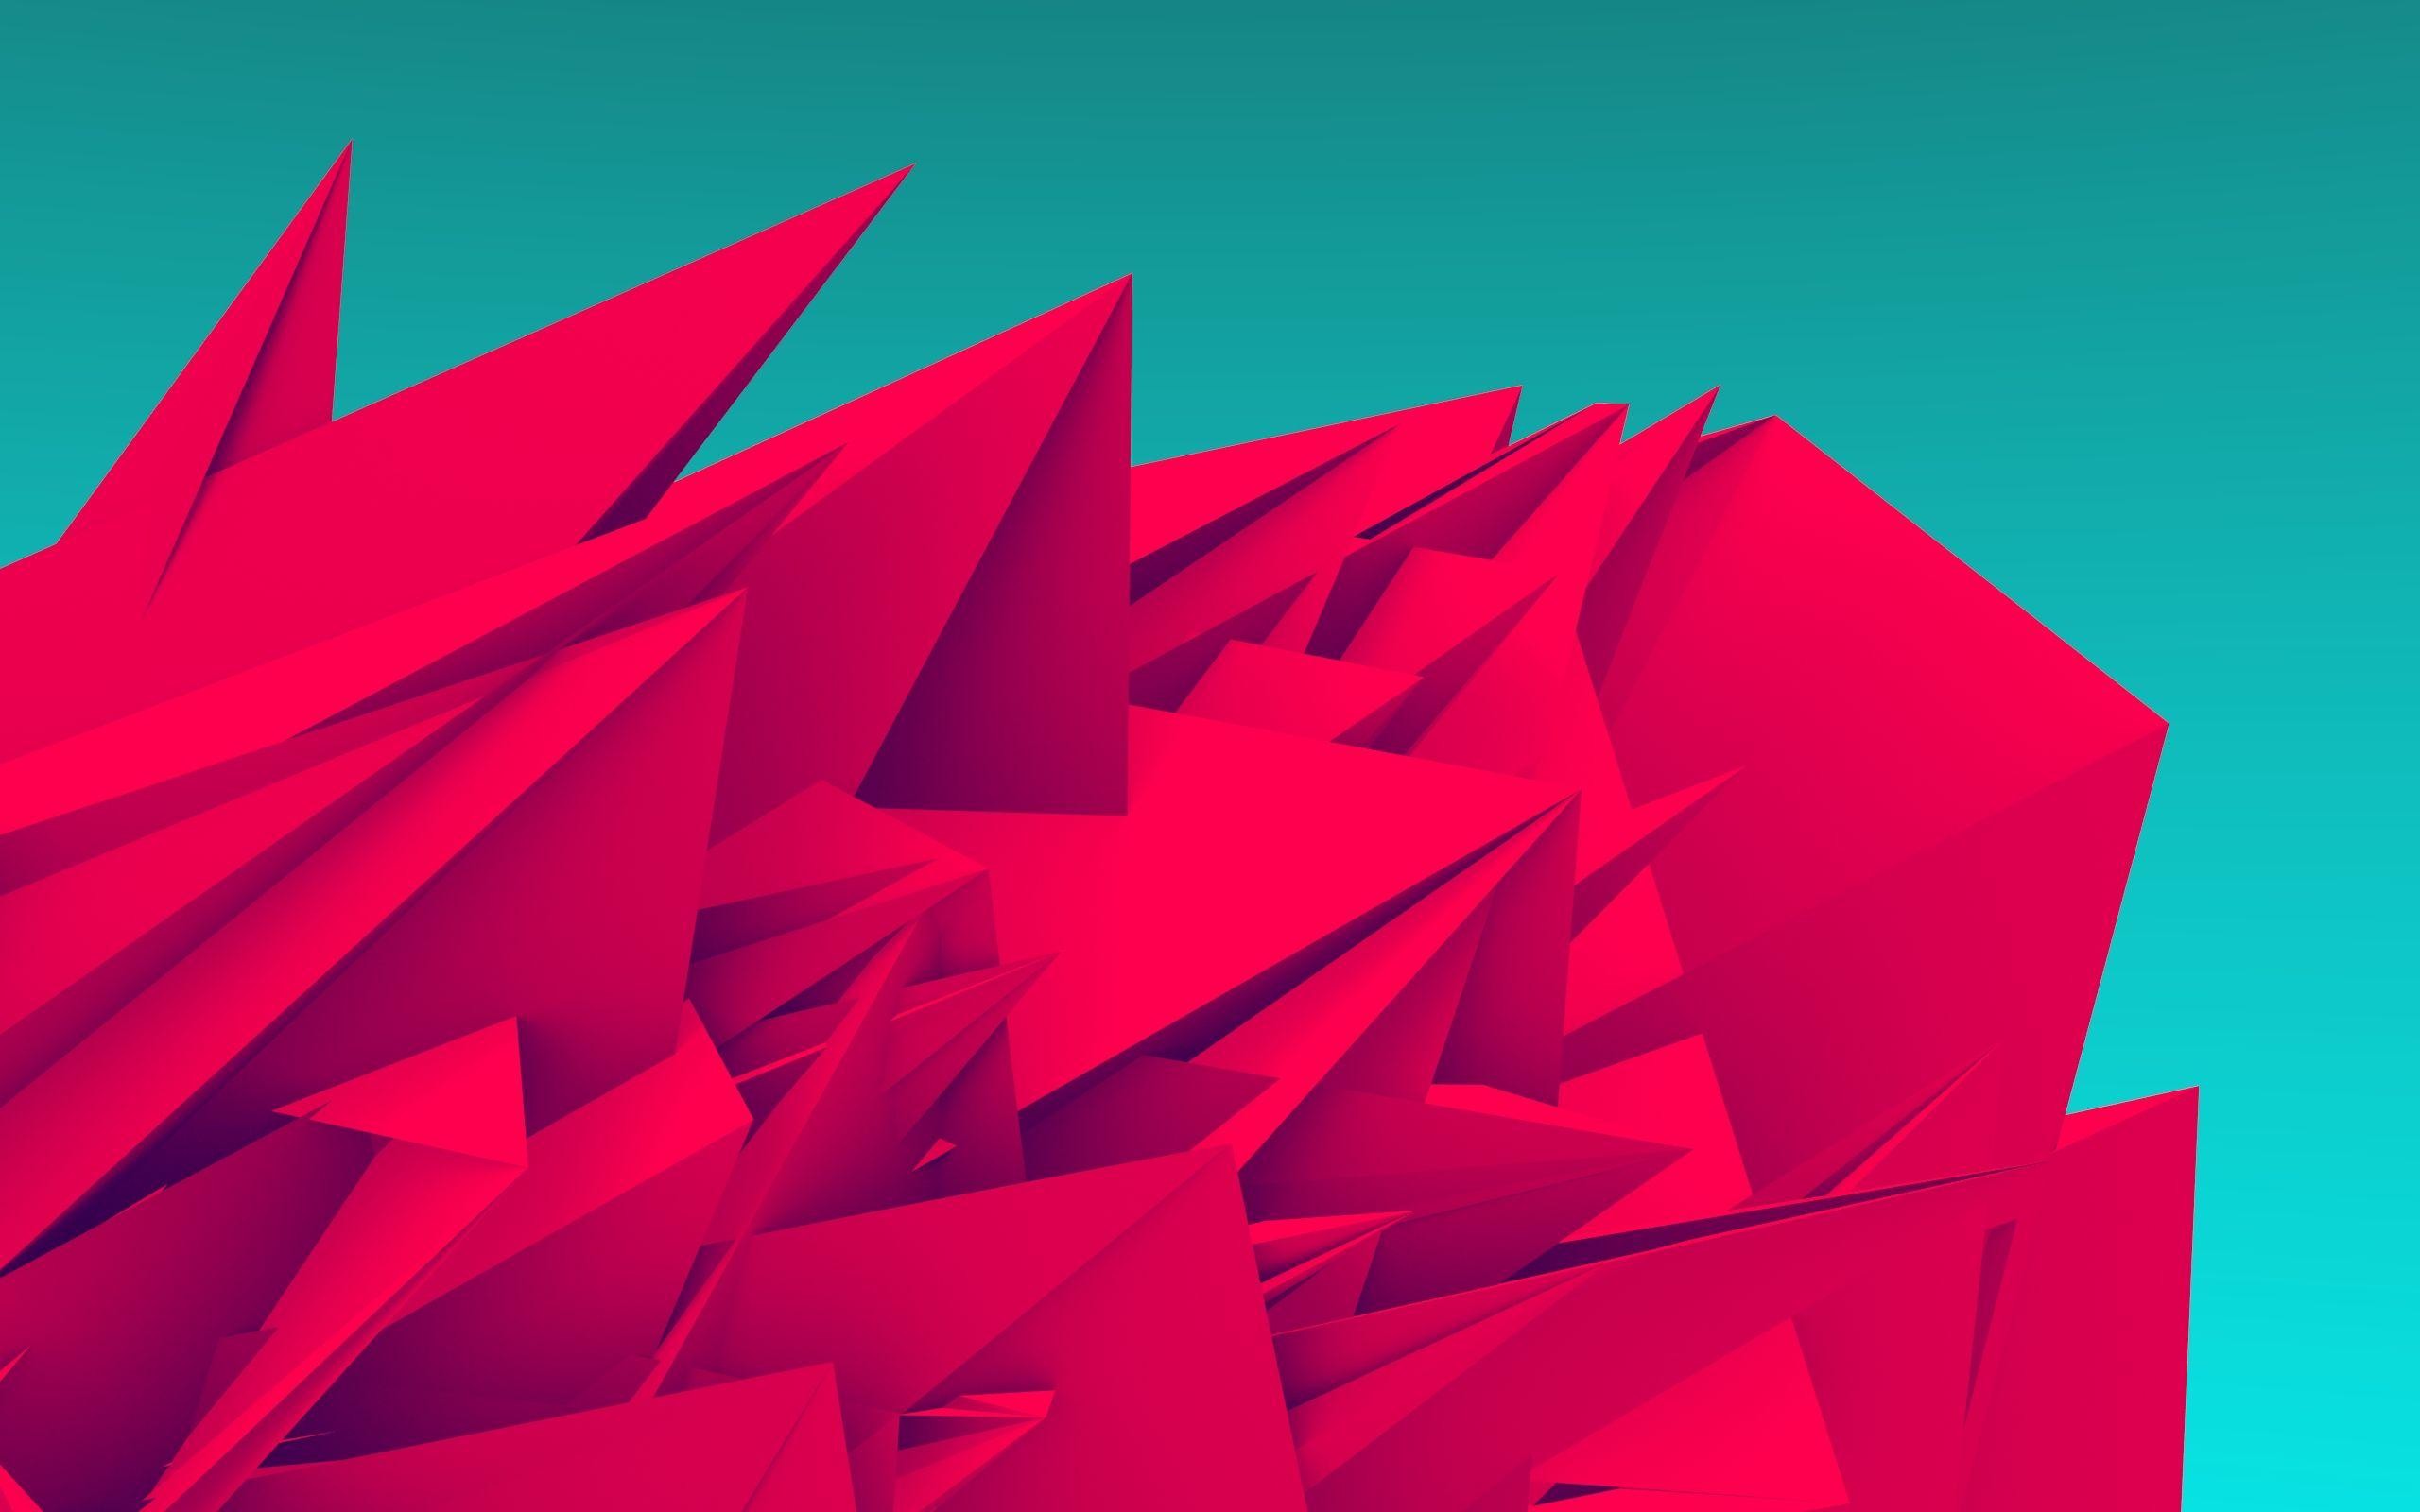 2560x1600 High Def Collection: 44 Full HD Low Poly Wallpapers (In Full HD .